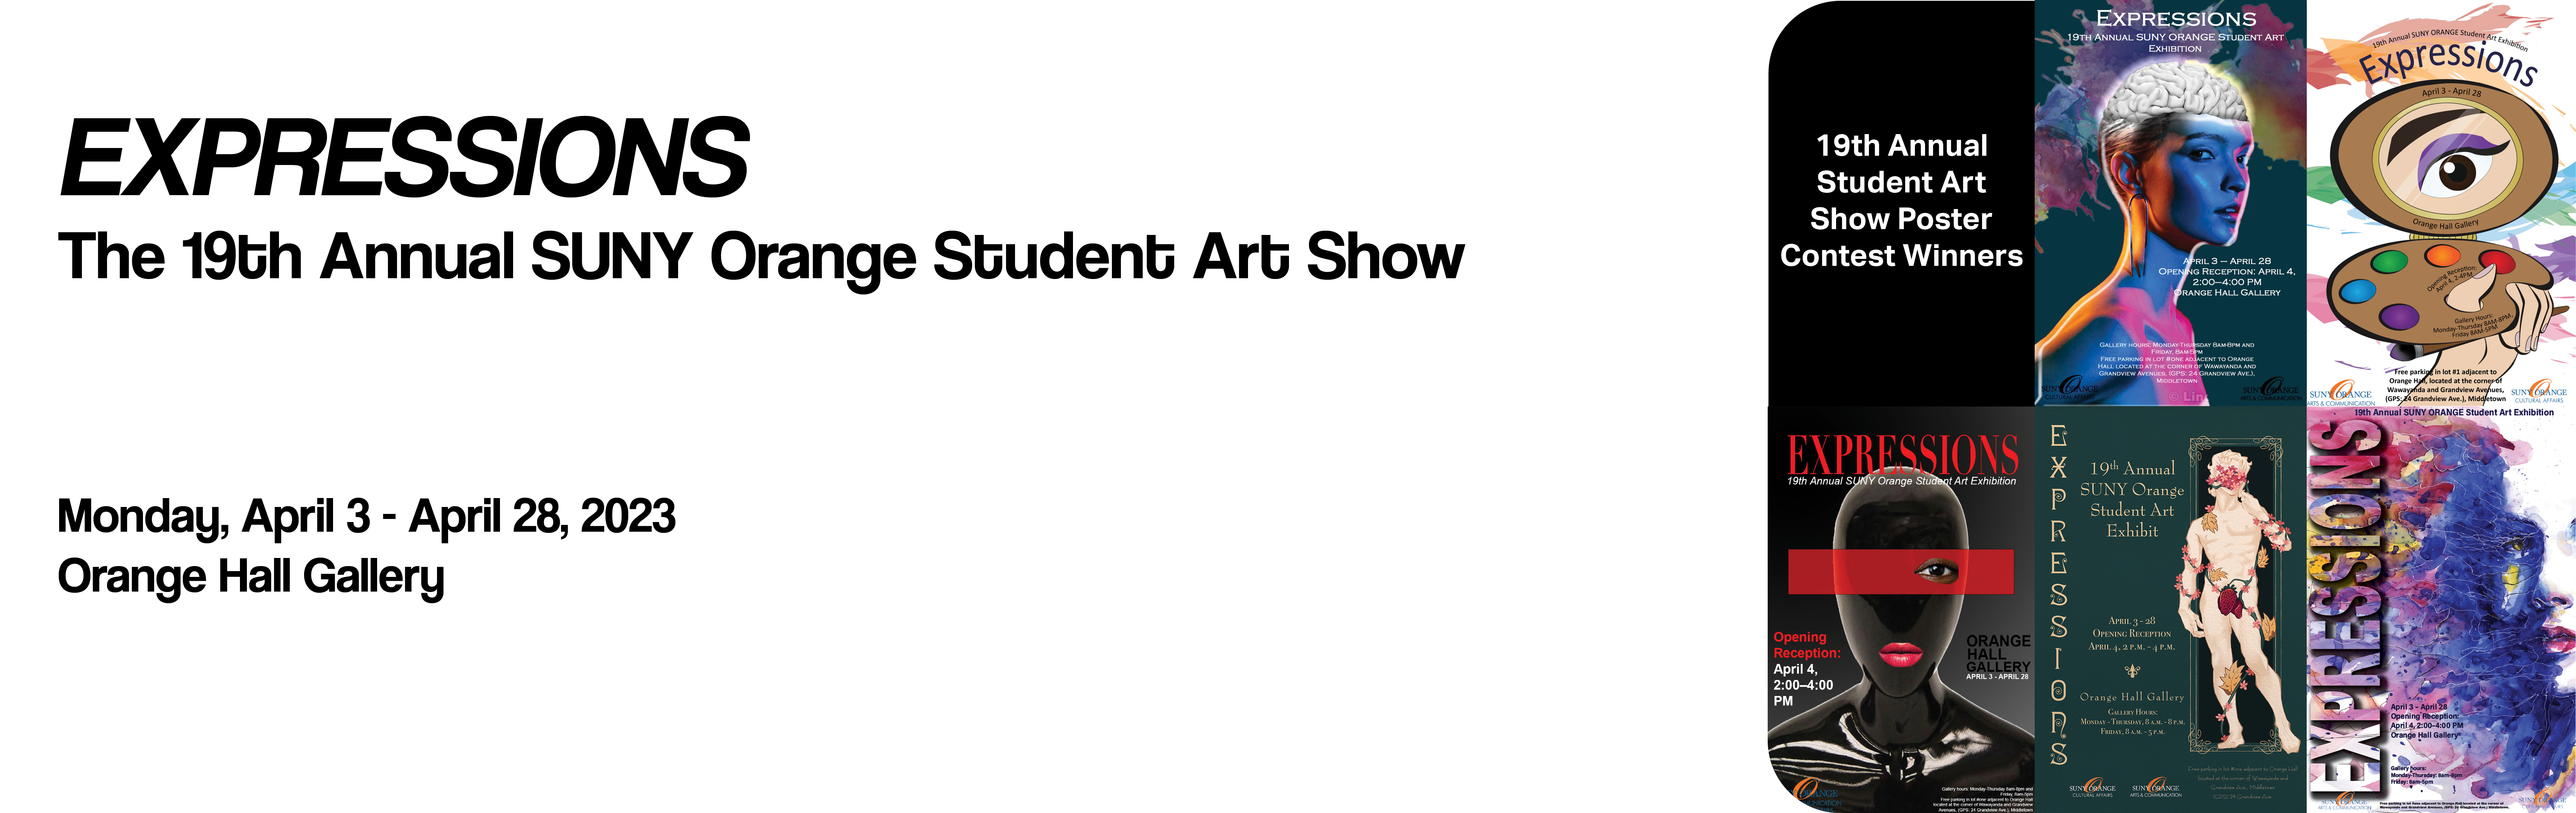 The 19th Annual SUNY Orange Student Art Show EXPRESSIONS